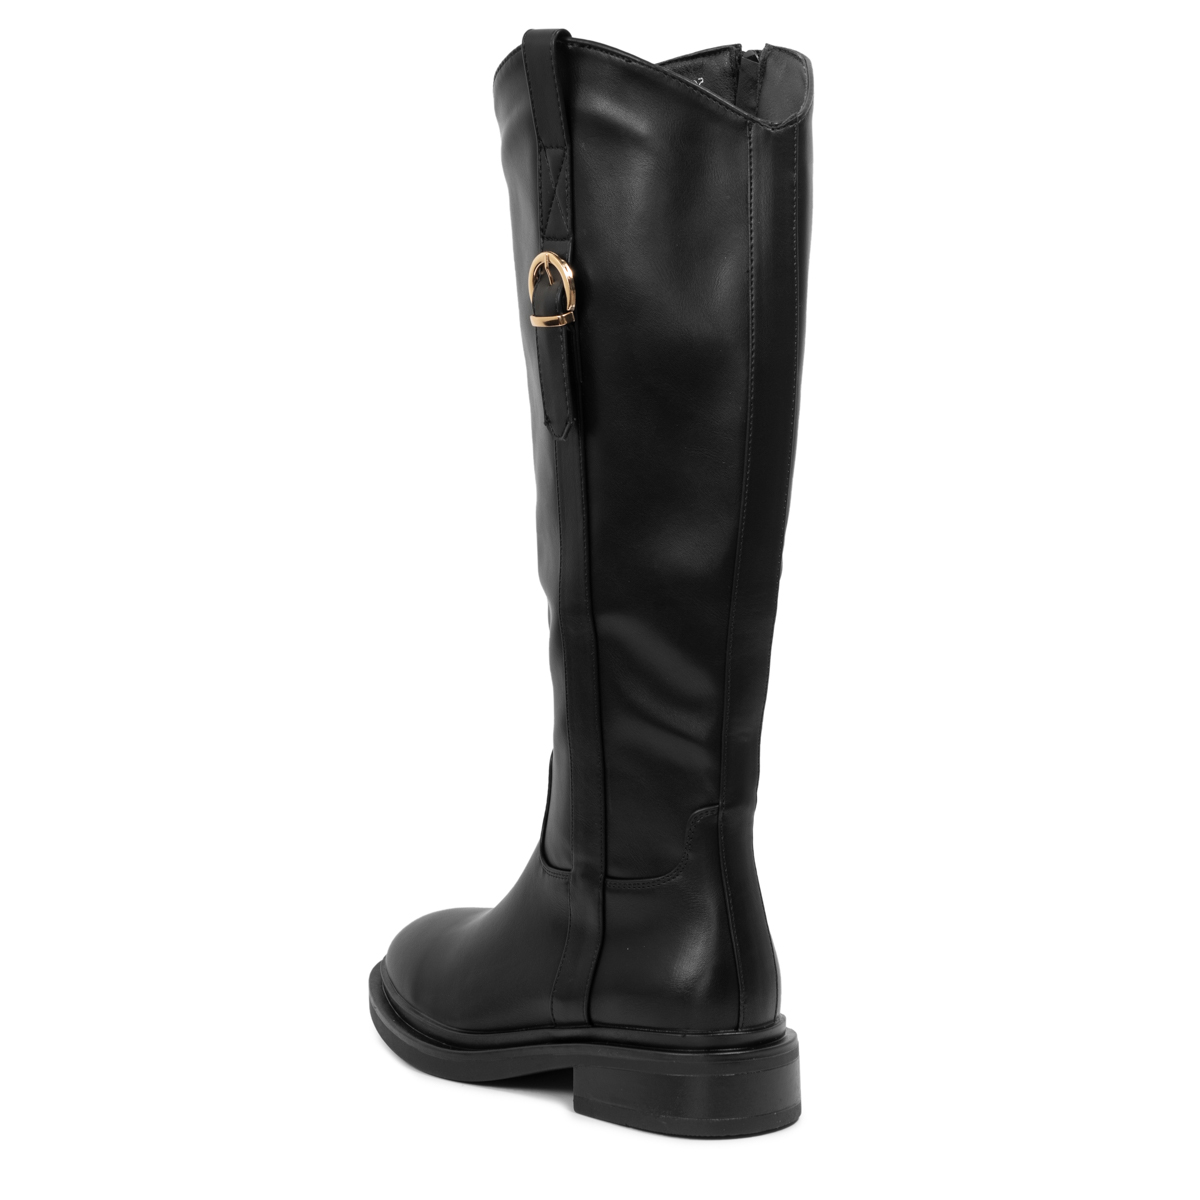 LEGACY VEGAN LEATHER BOOTS - Glamazons